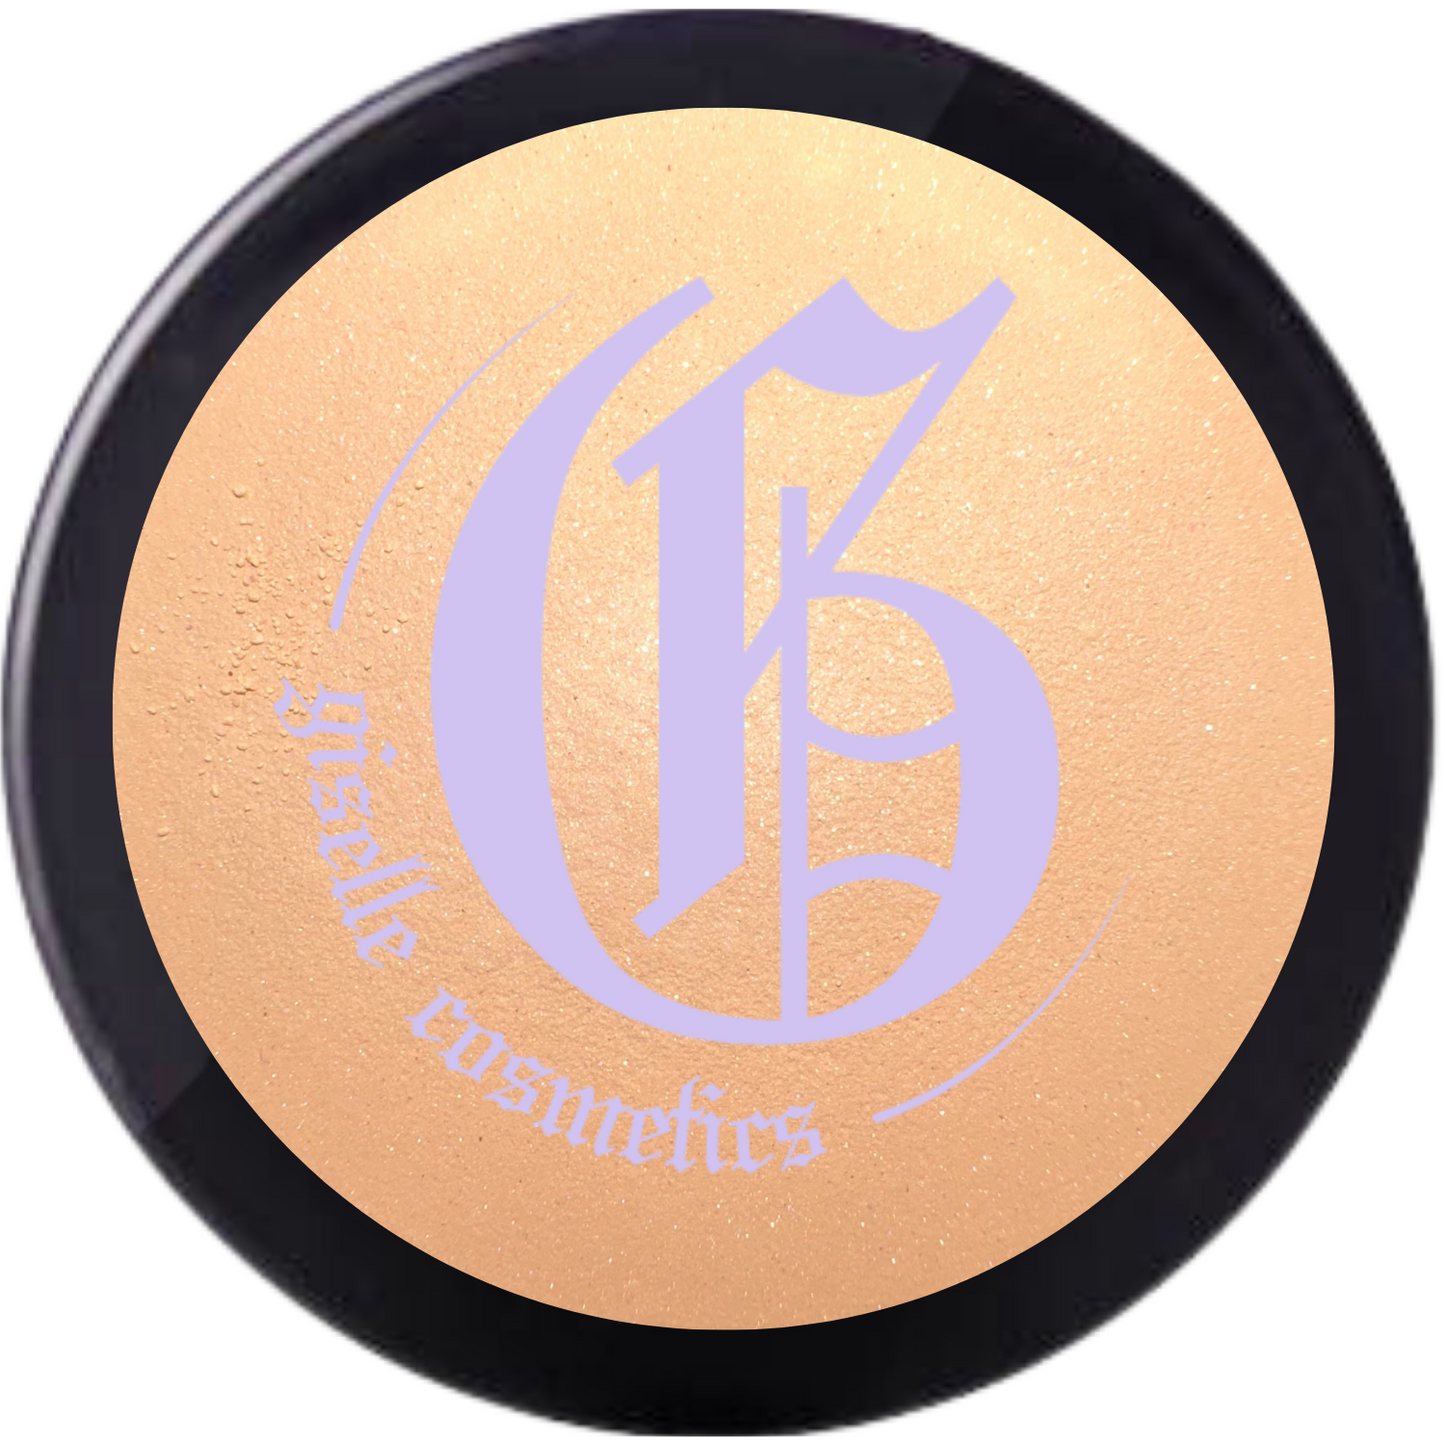 Flawless Mineral Face Powder